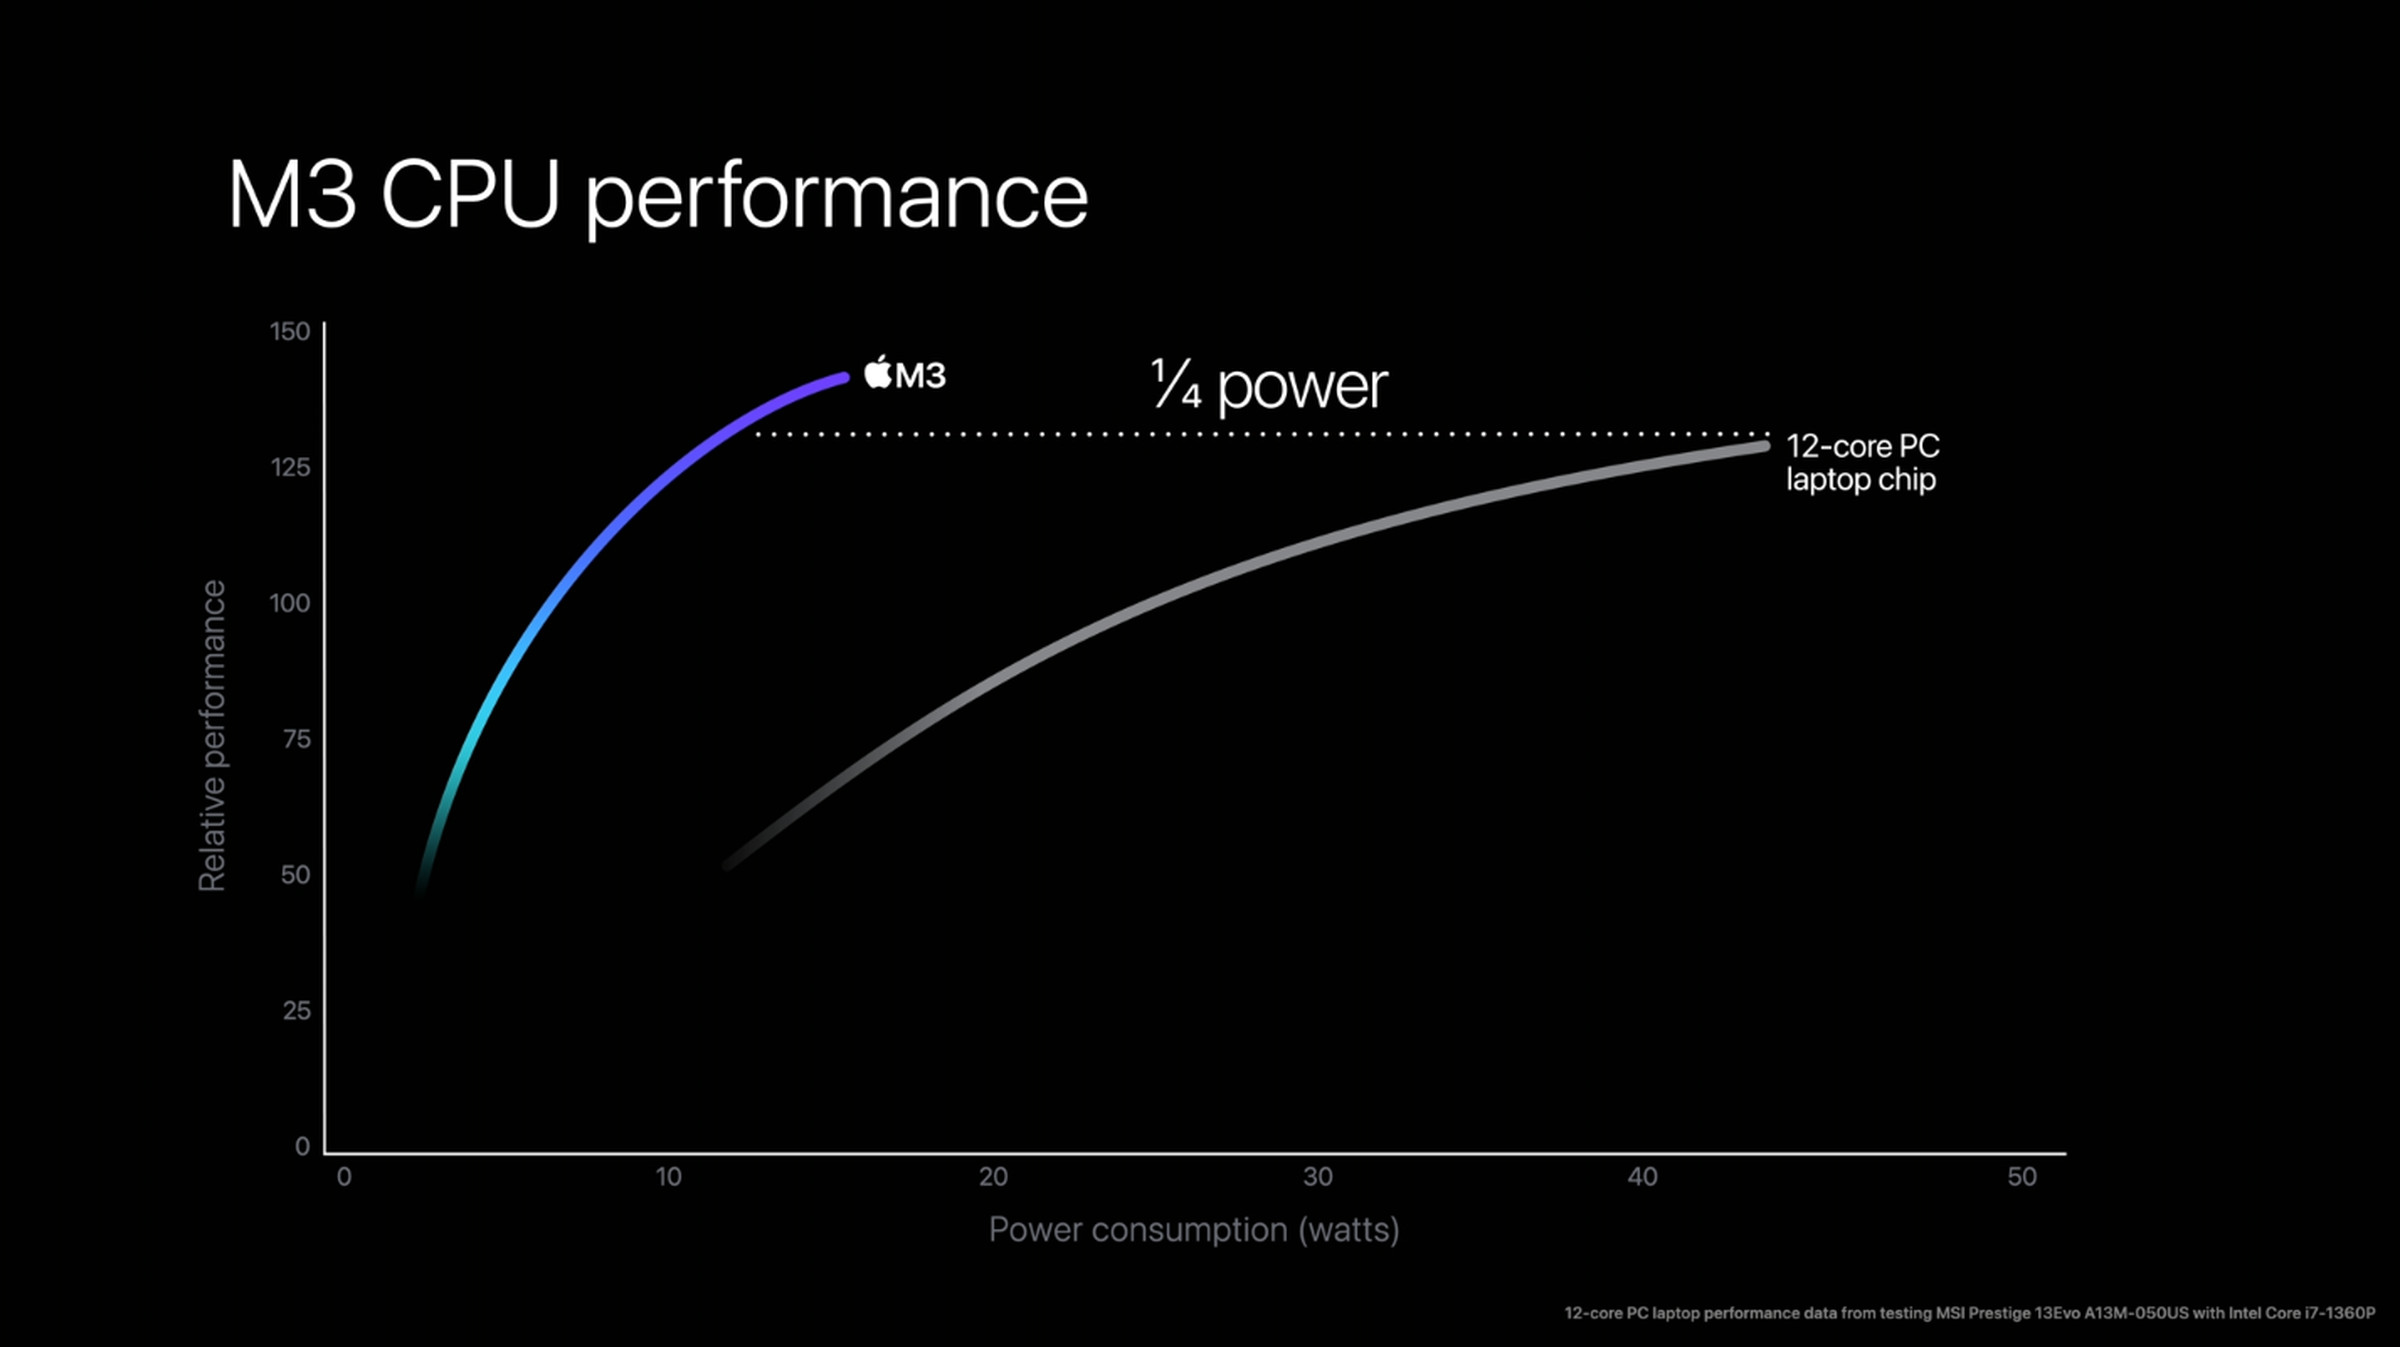 Apple’s M3 CPU power consumption compared to Intel’s Core i7 1360P.